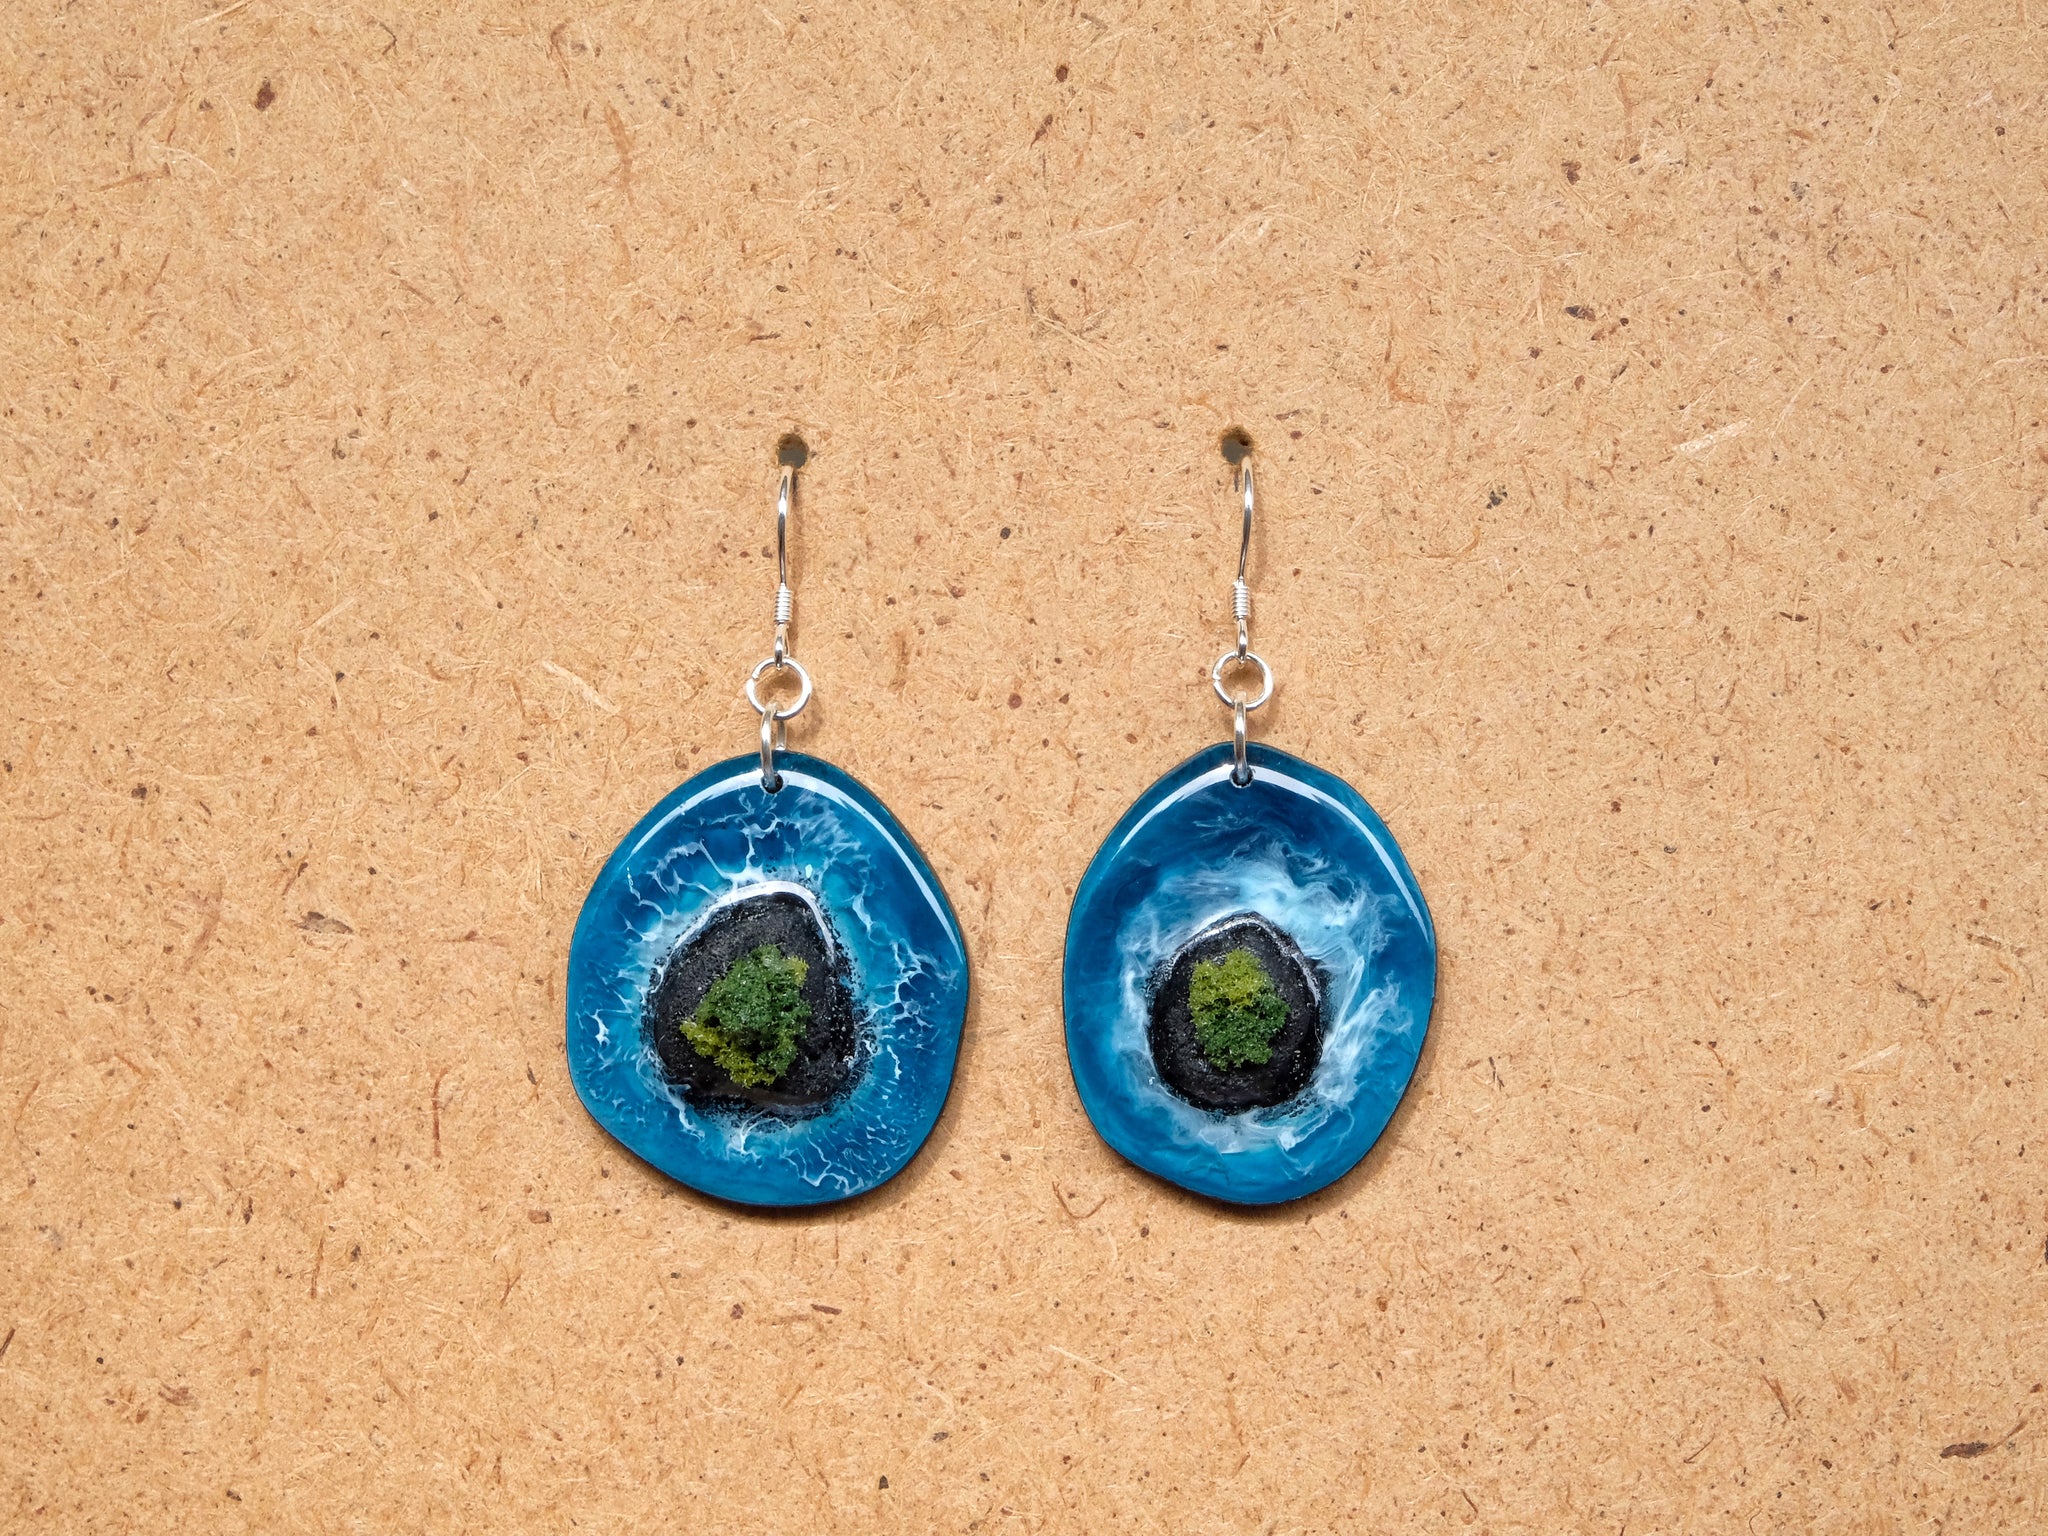 Island Earrings Collection: Teal on Black #1